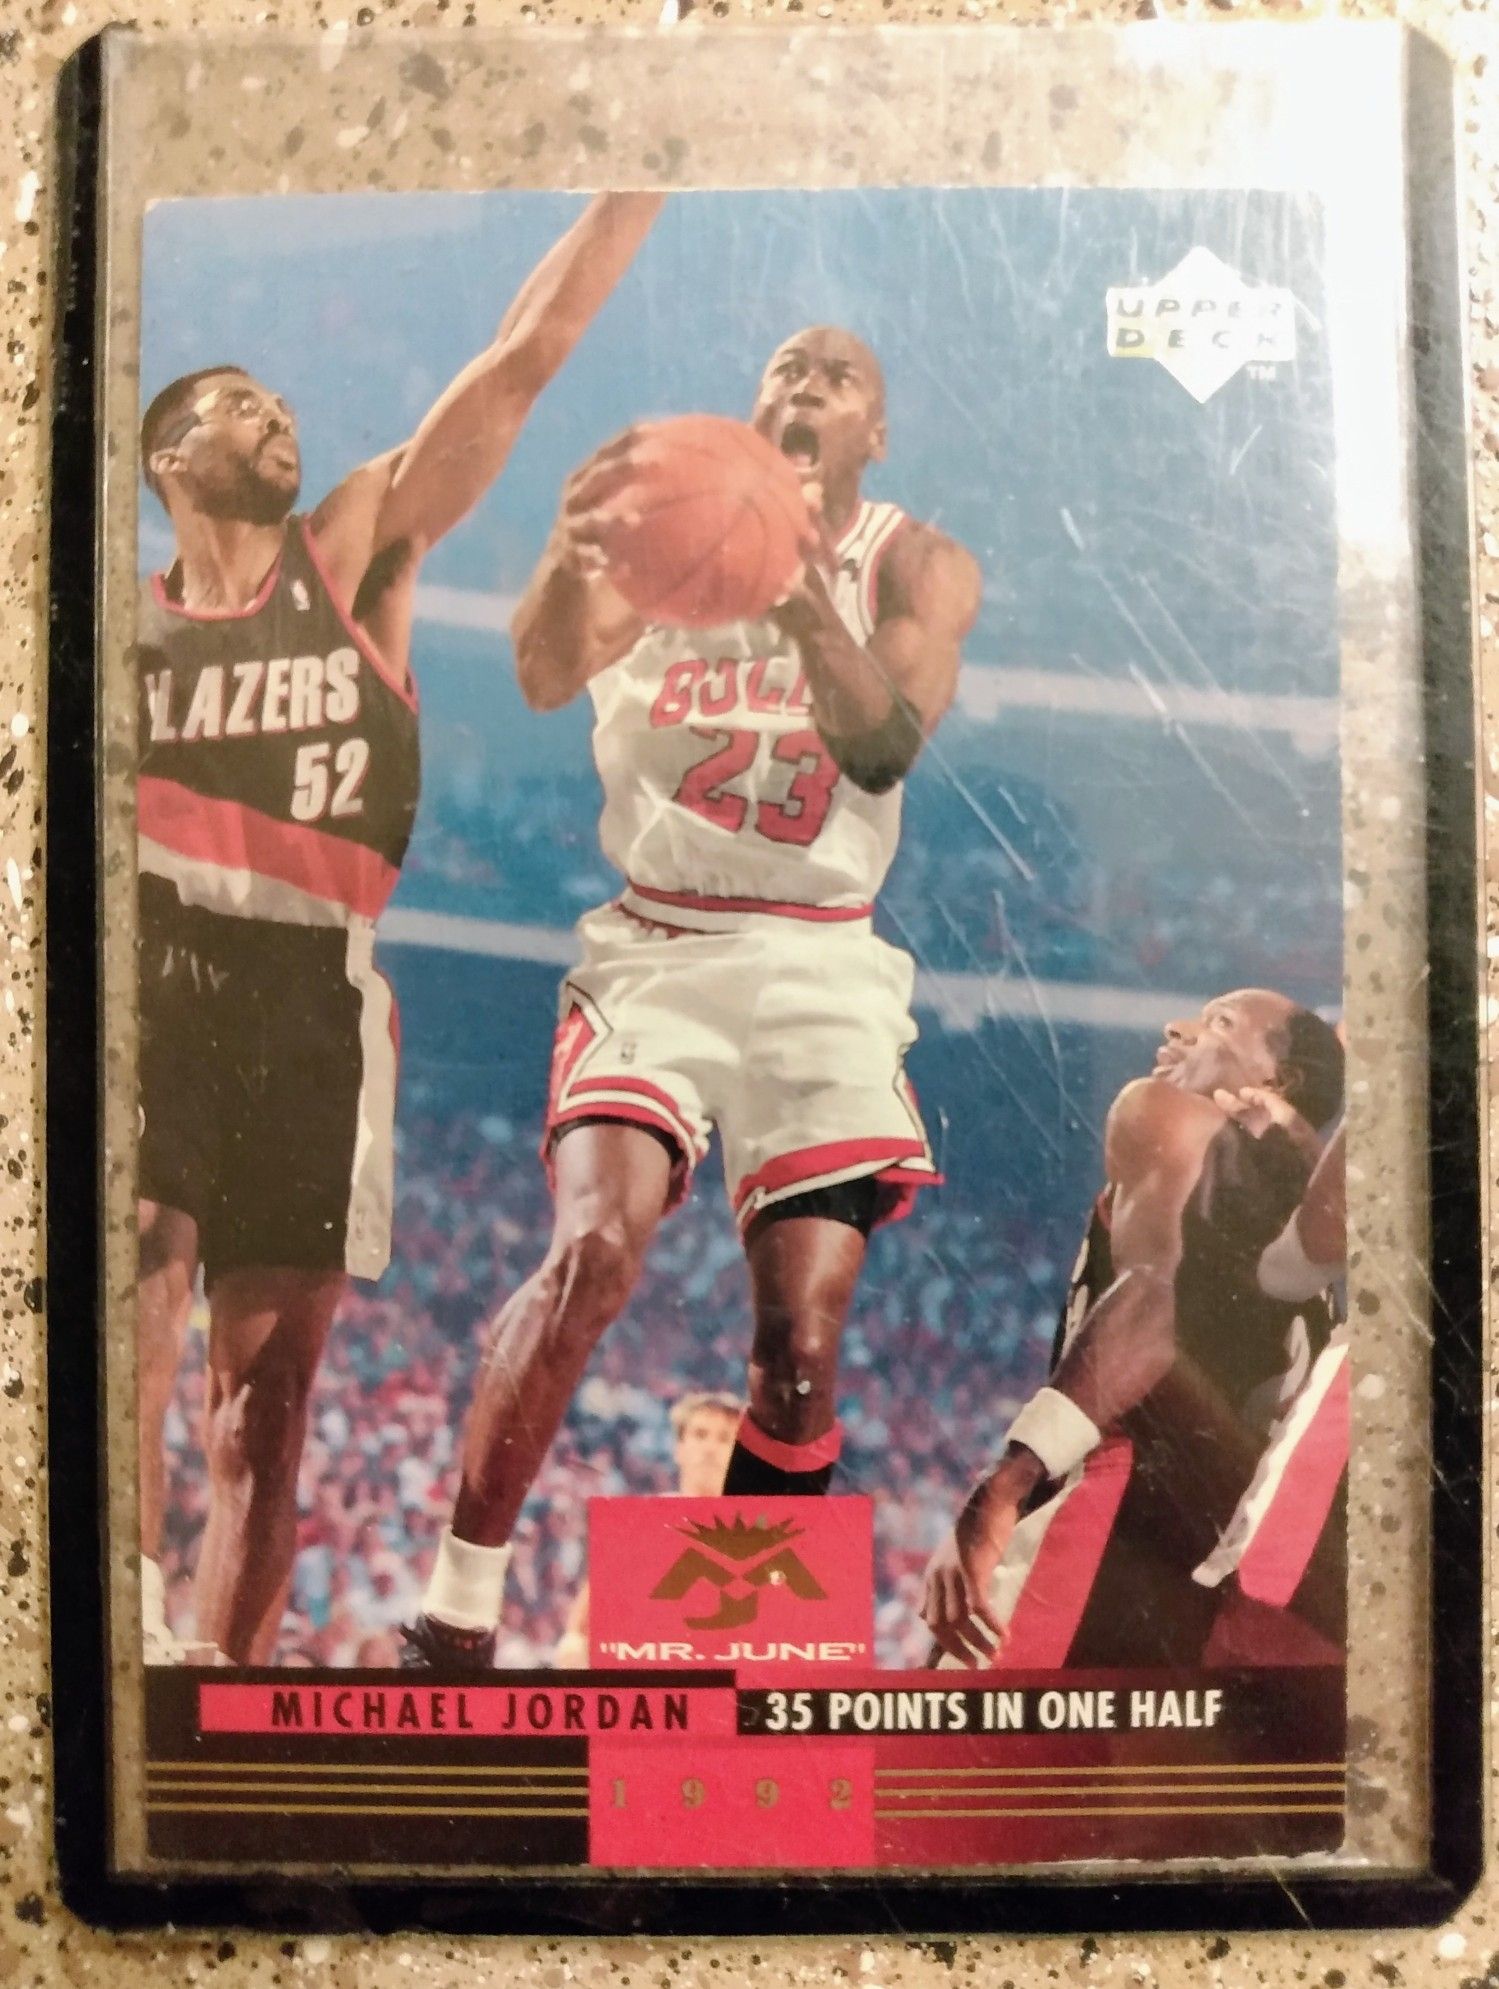 UpperDeck Michael Jordan "Mr. March" Basketball Card In Excellent Condition With Protective Sleeve